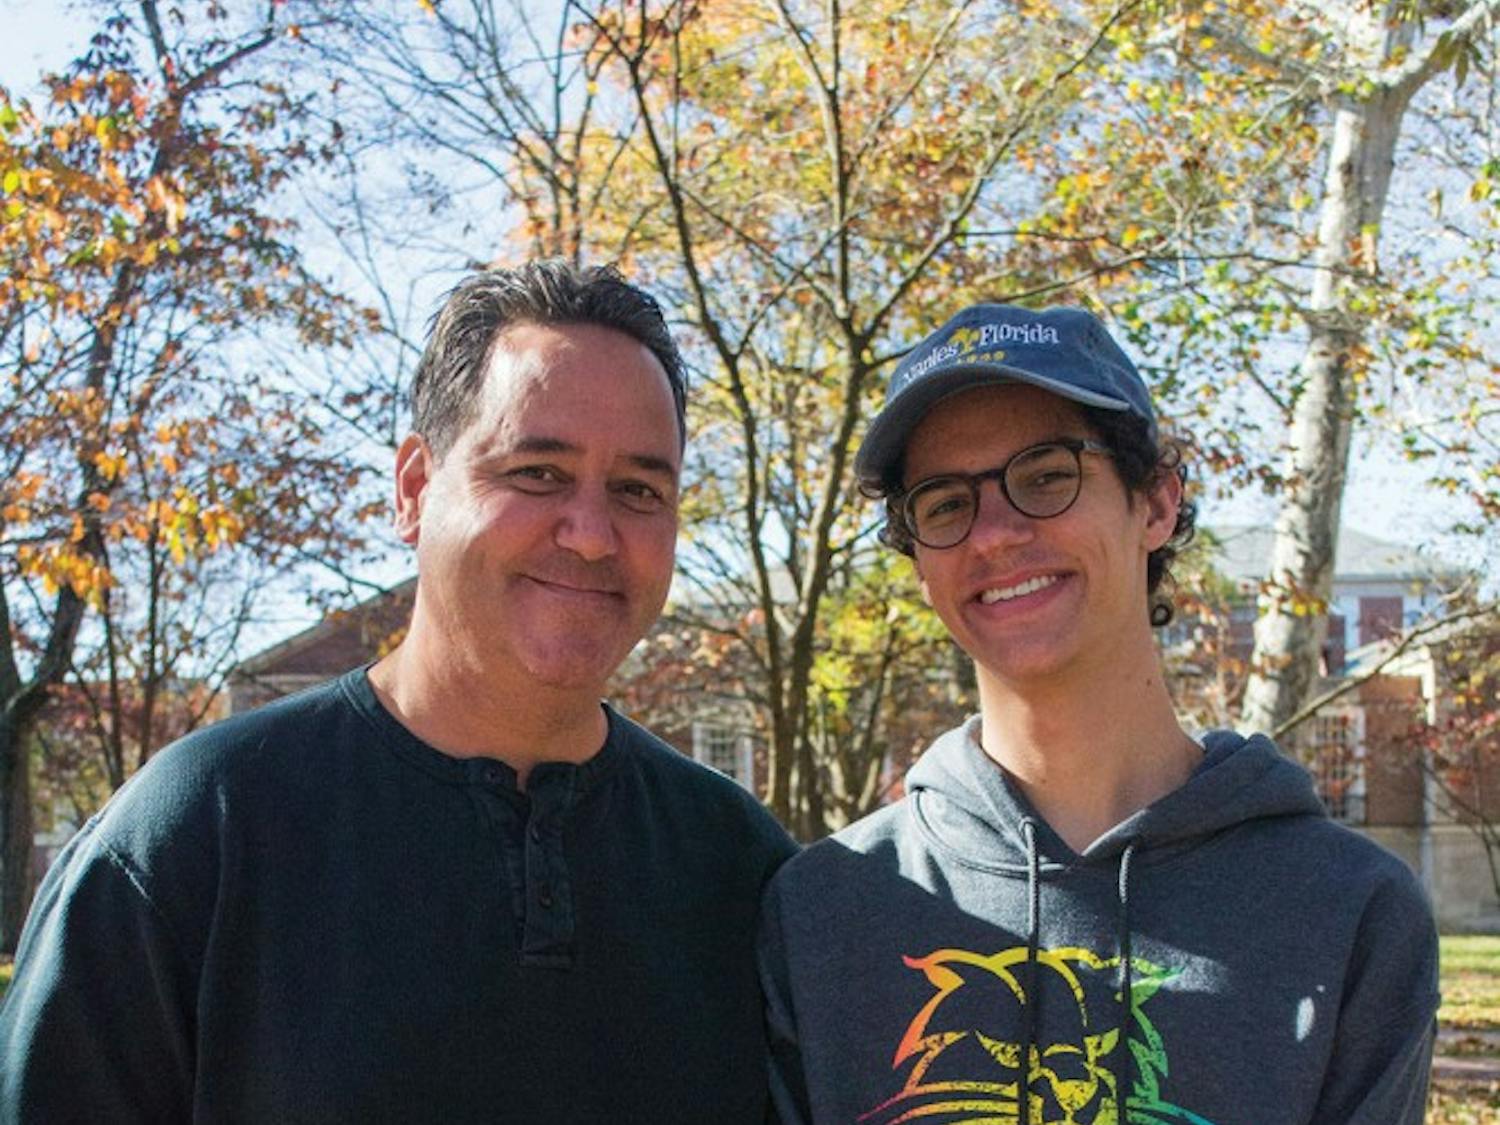 Nick Dighero, a freshman studying wildlife conservation, and his dad, Jim Dighero  